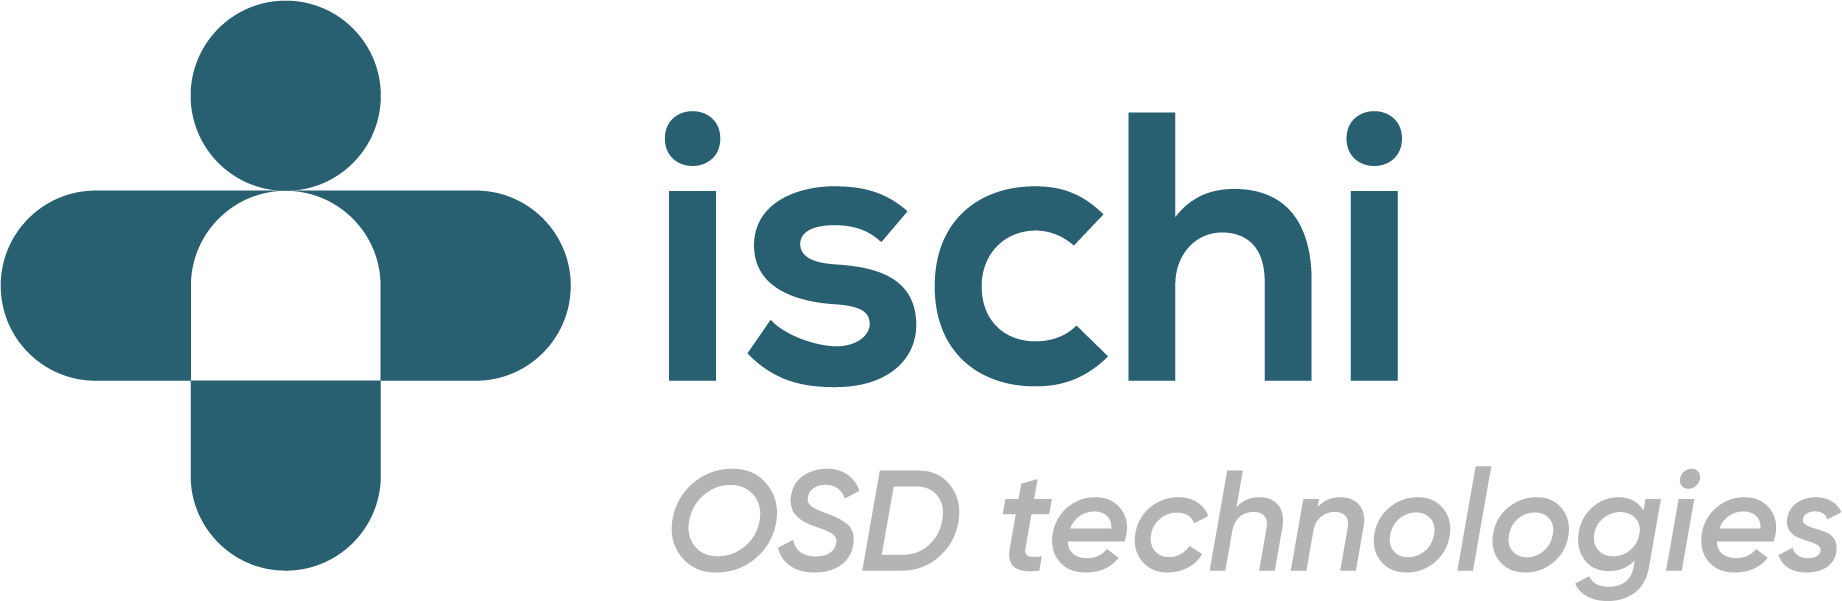 Charles Ischi joins forces with Techceuticals in tablet and capsule performance webinar